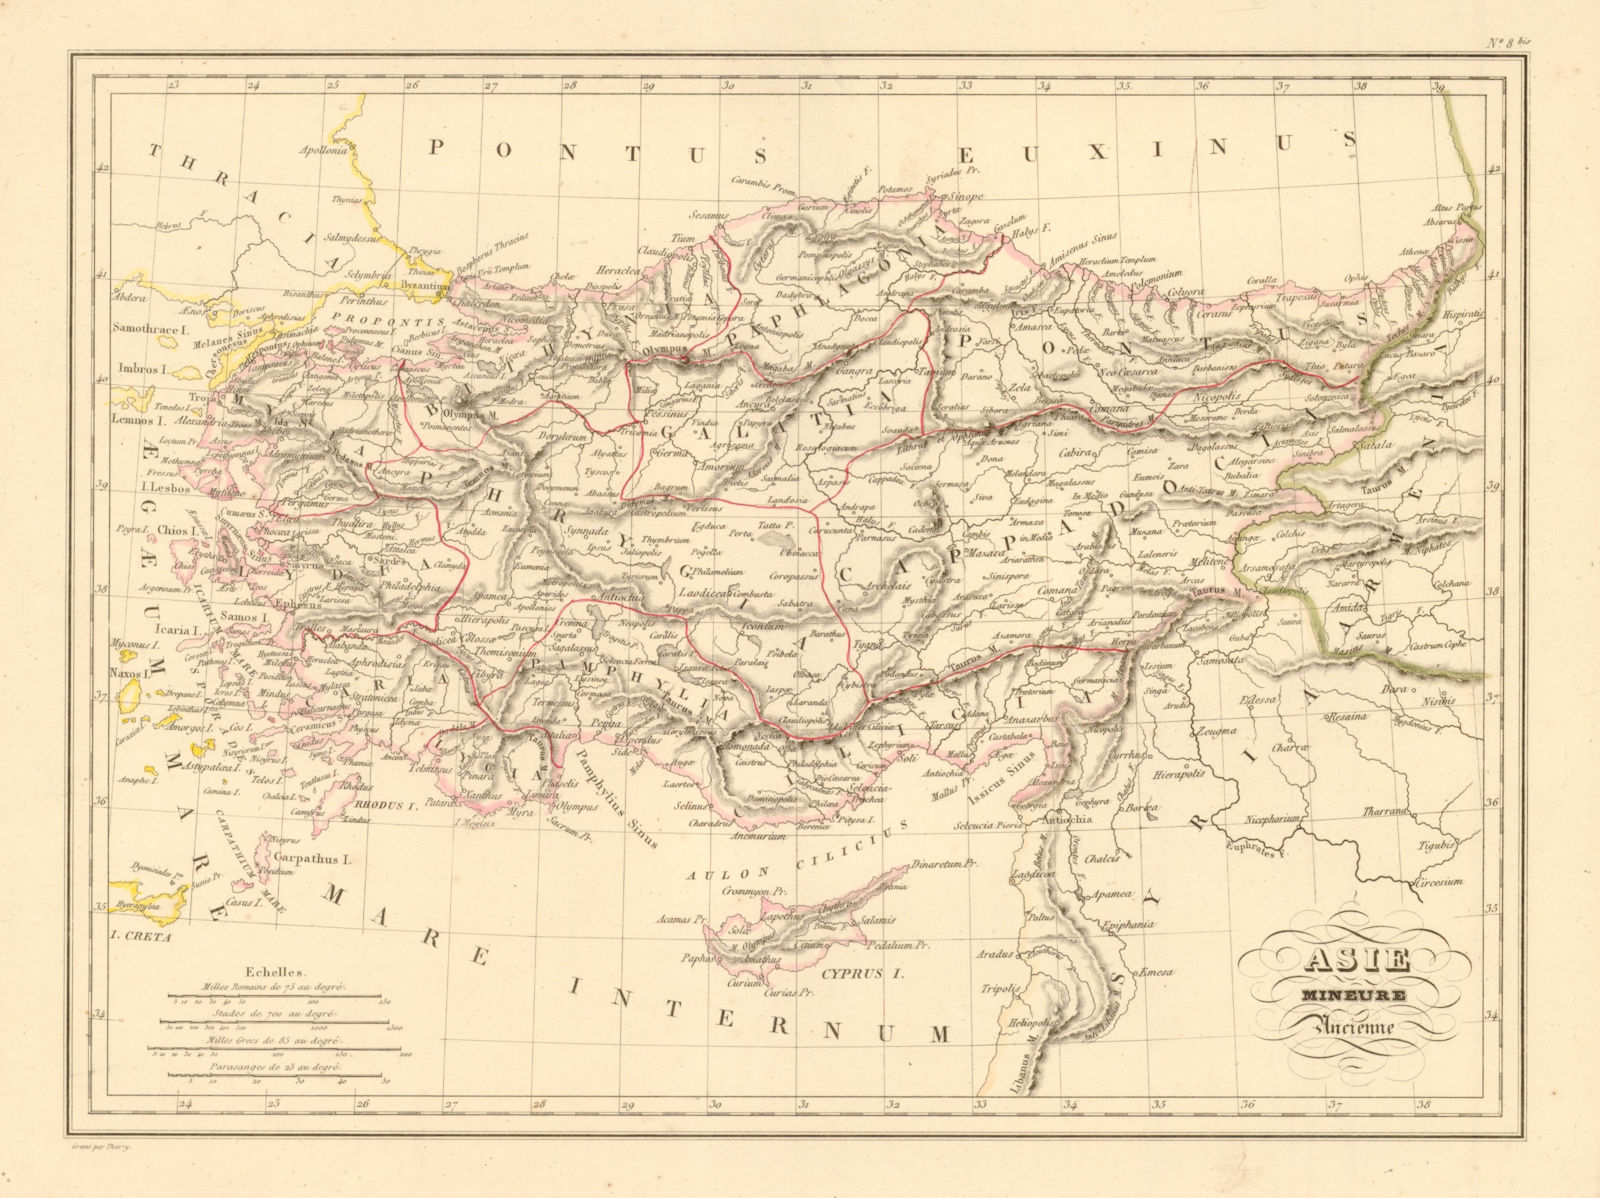 'Asie Mineure Ancienne'. MALTE-BRUN. Ancient Turkey Asia Minor Barbary 1836 map